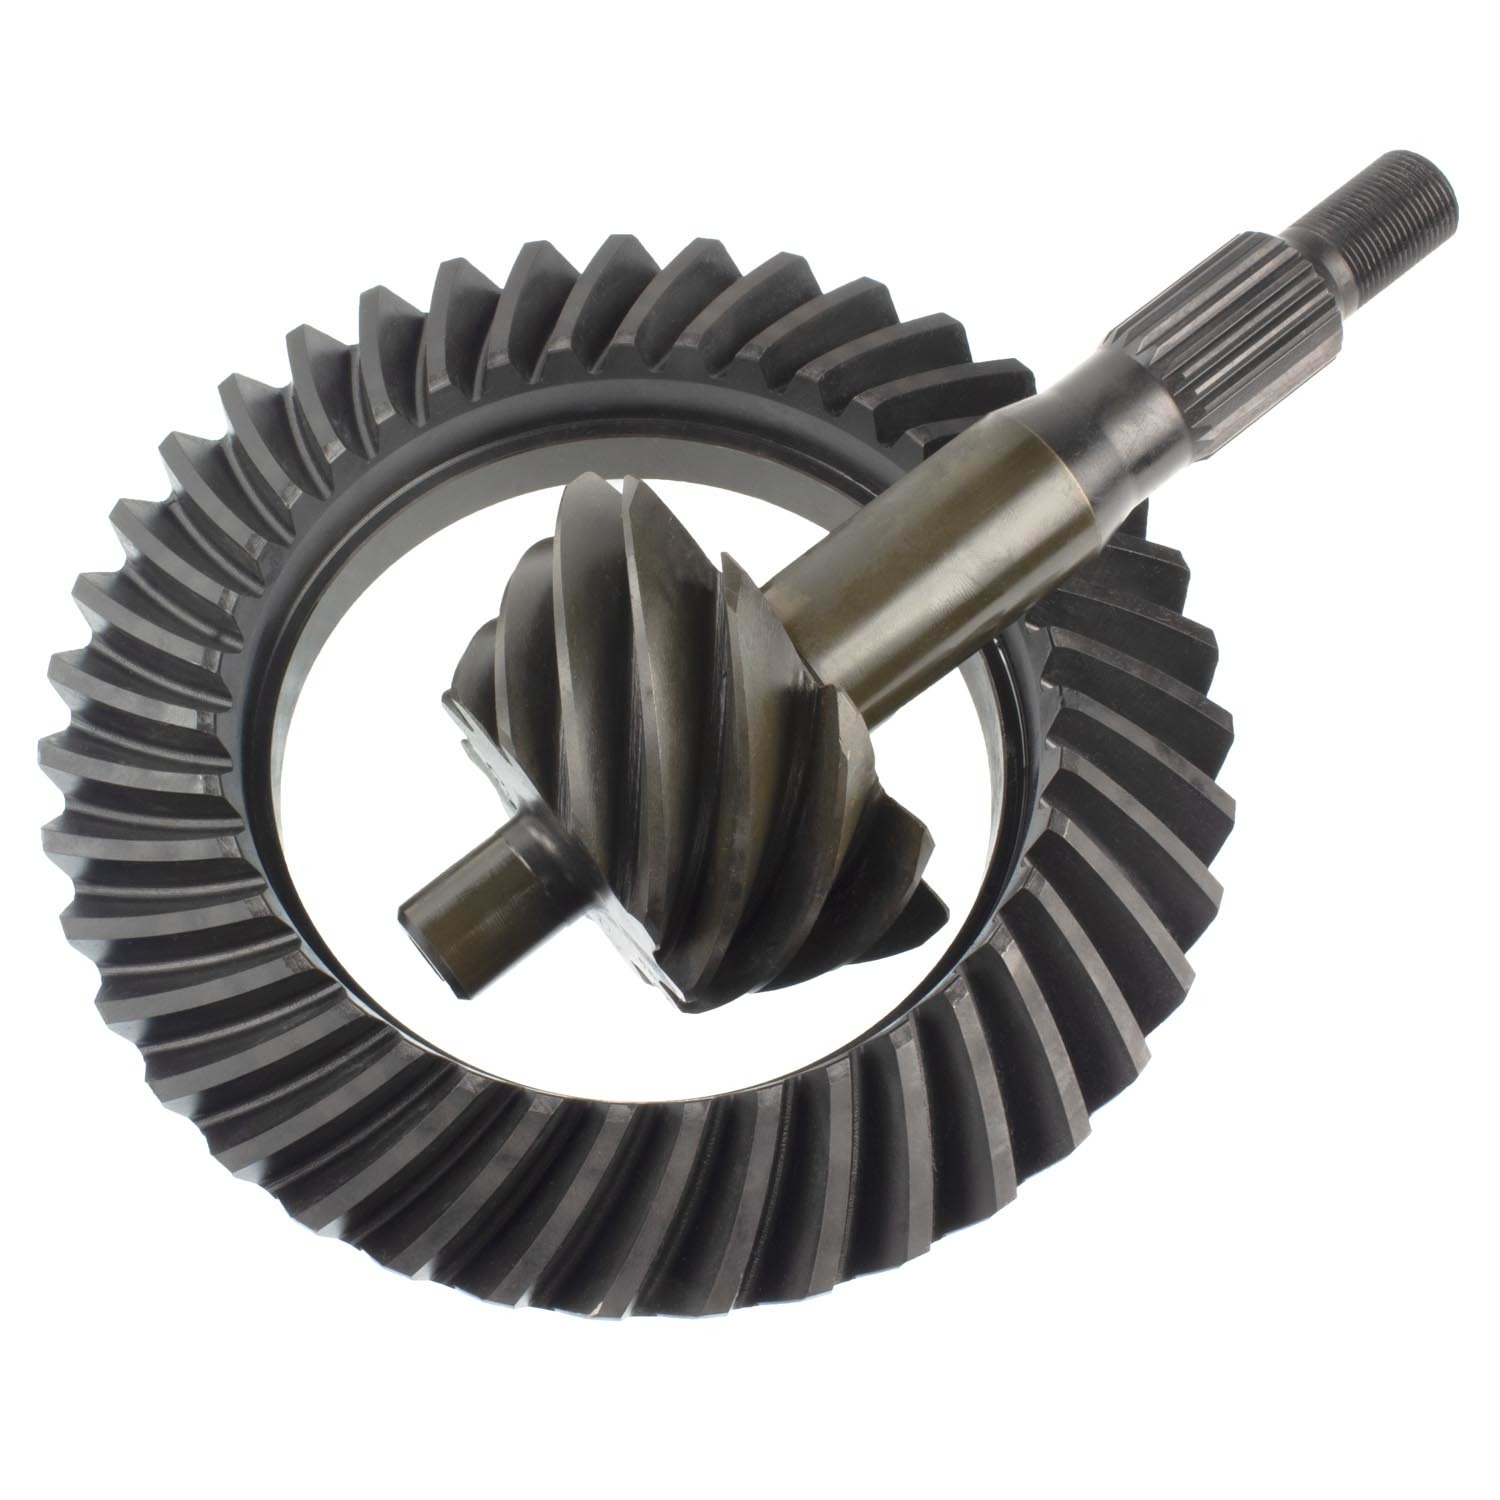 Richmond Gear F8355 - Ring and Pinion, 3.55 Ratio, 25 Spline Pinion, Ford 8 in, Kit